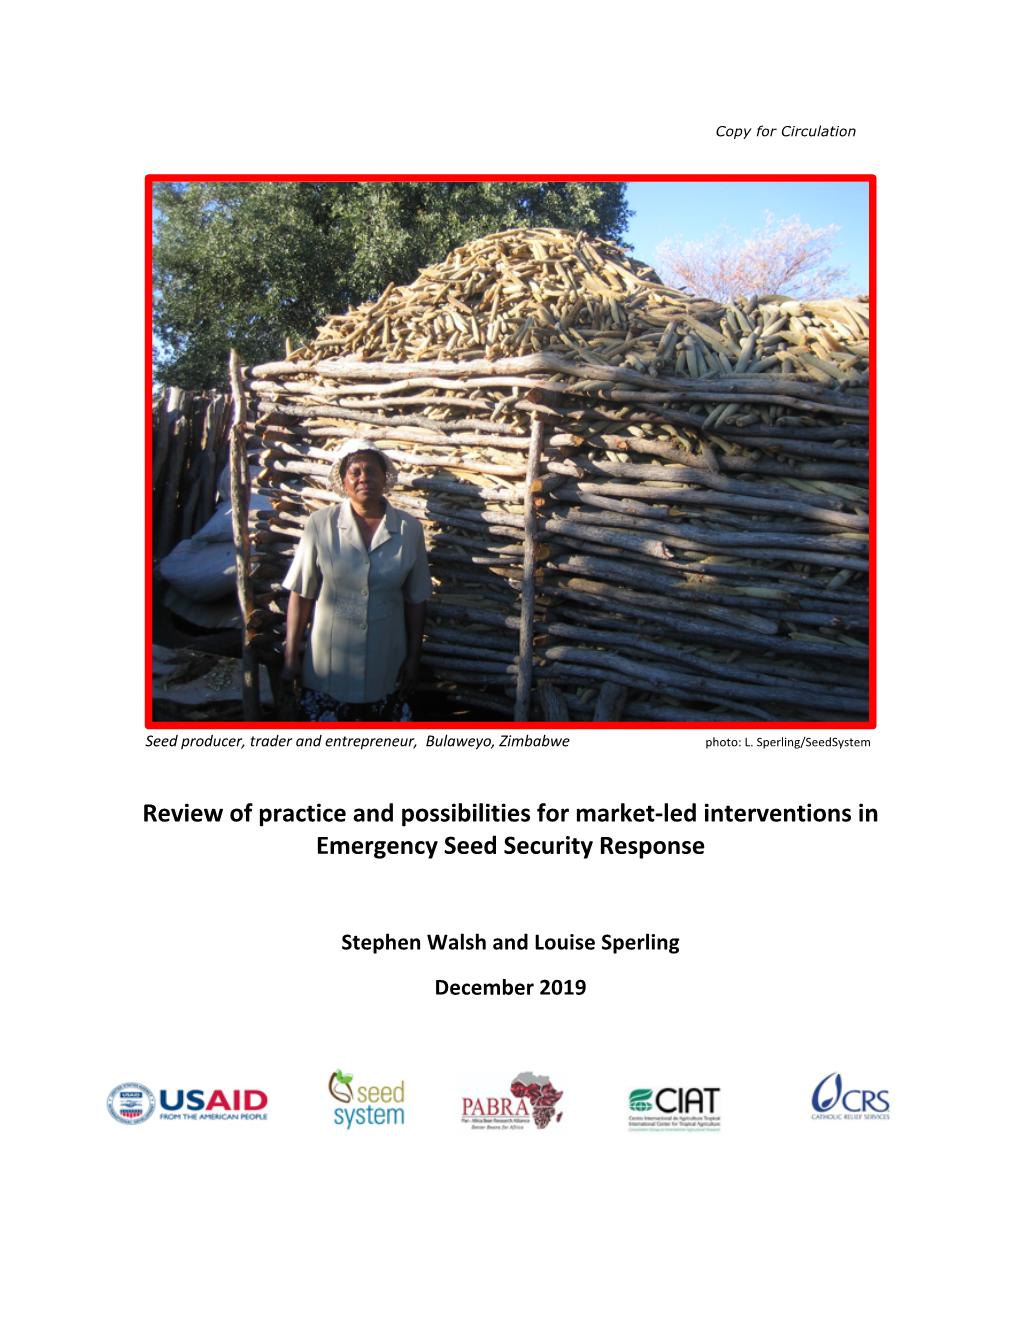 Review of Practice and Possibilities for Market-Led Interventions in Emergency Seed Security Response